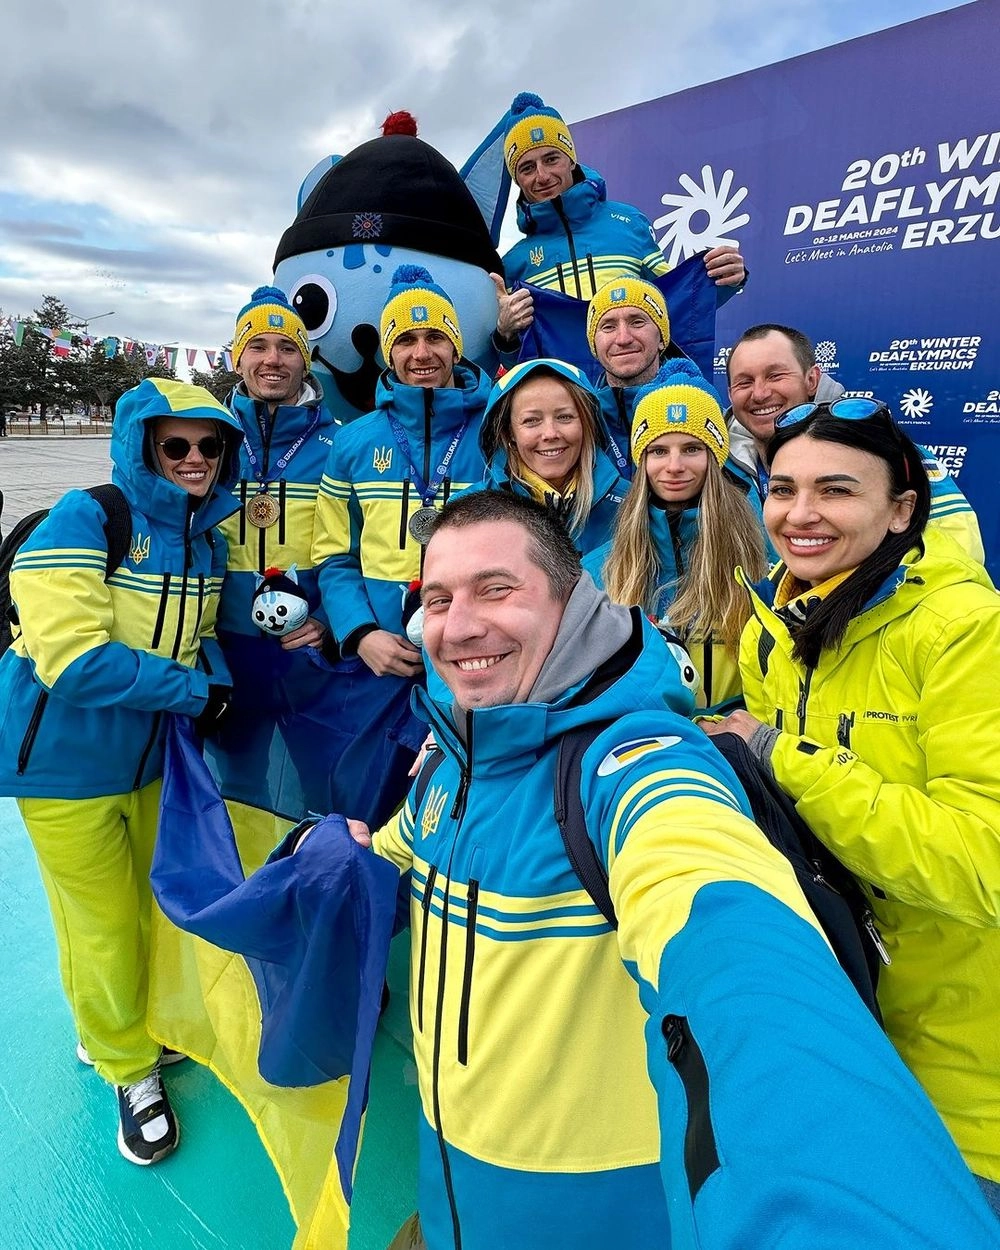 Ukraine wins the Winter Deaflympics for the first time in history, winning a record 19 medals